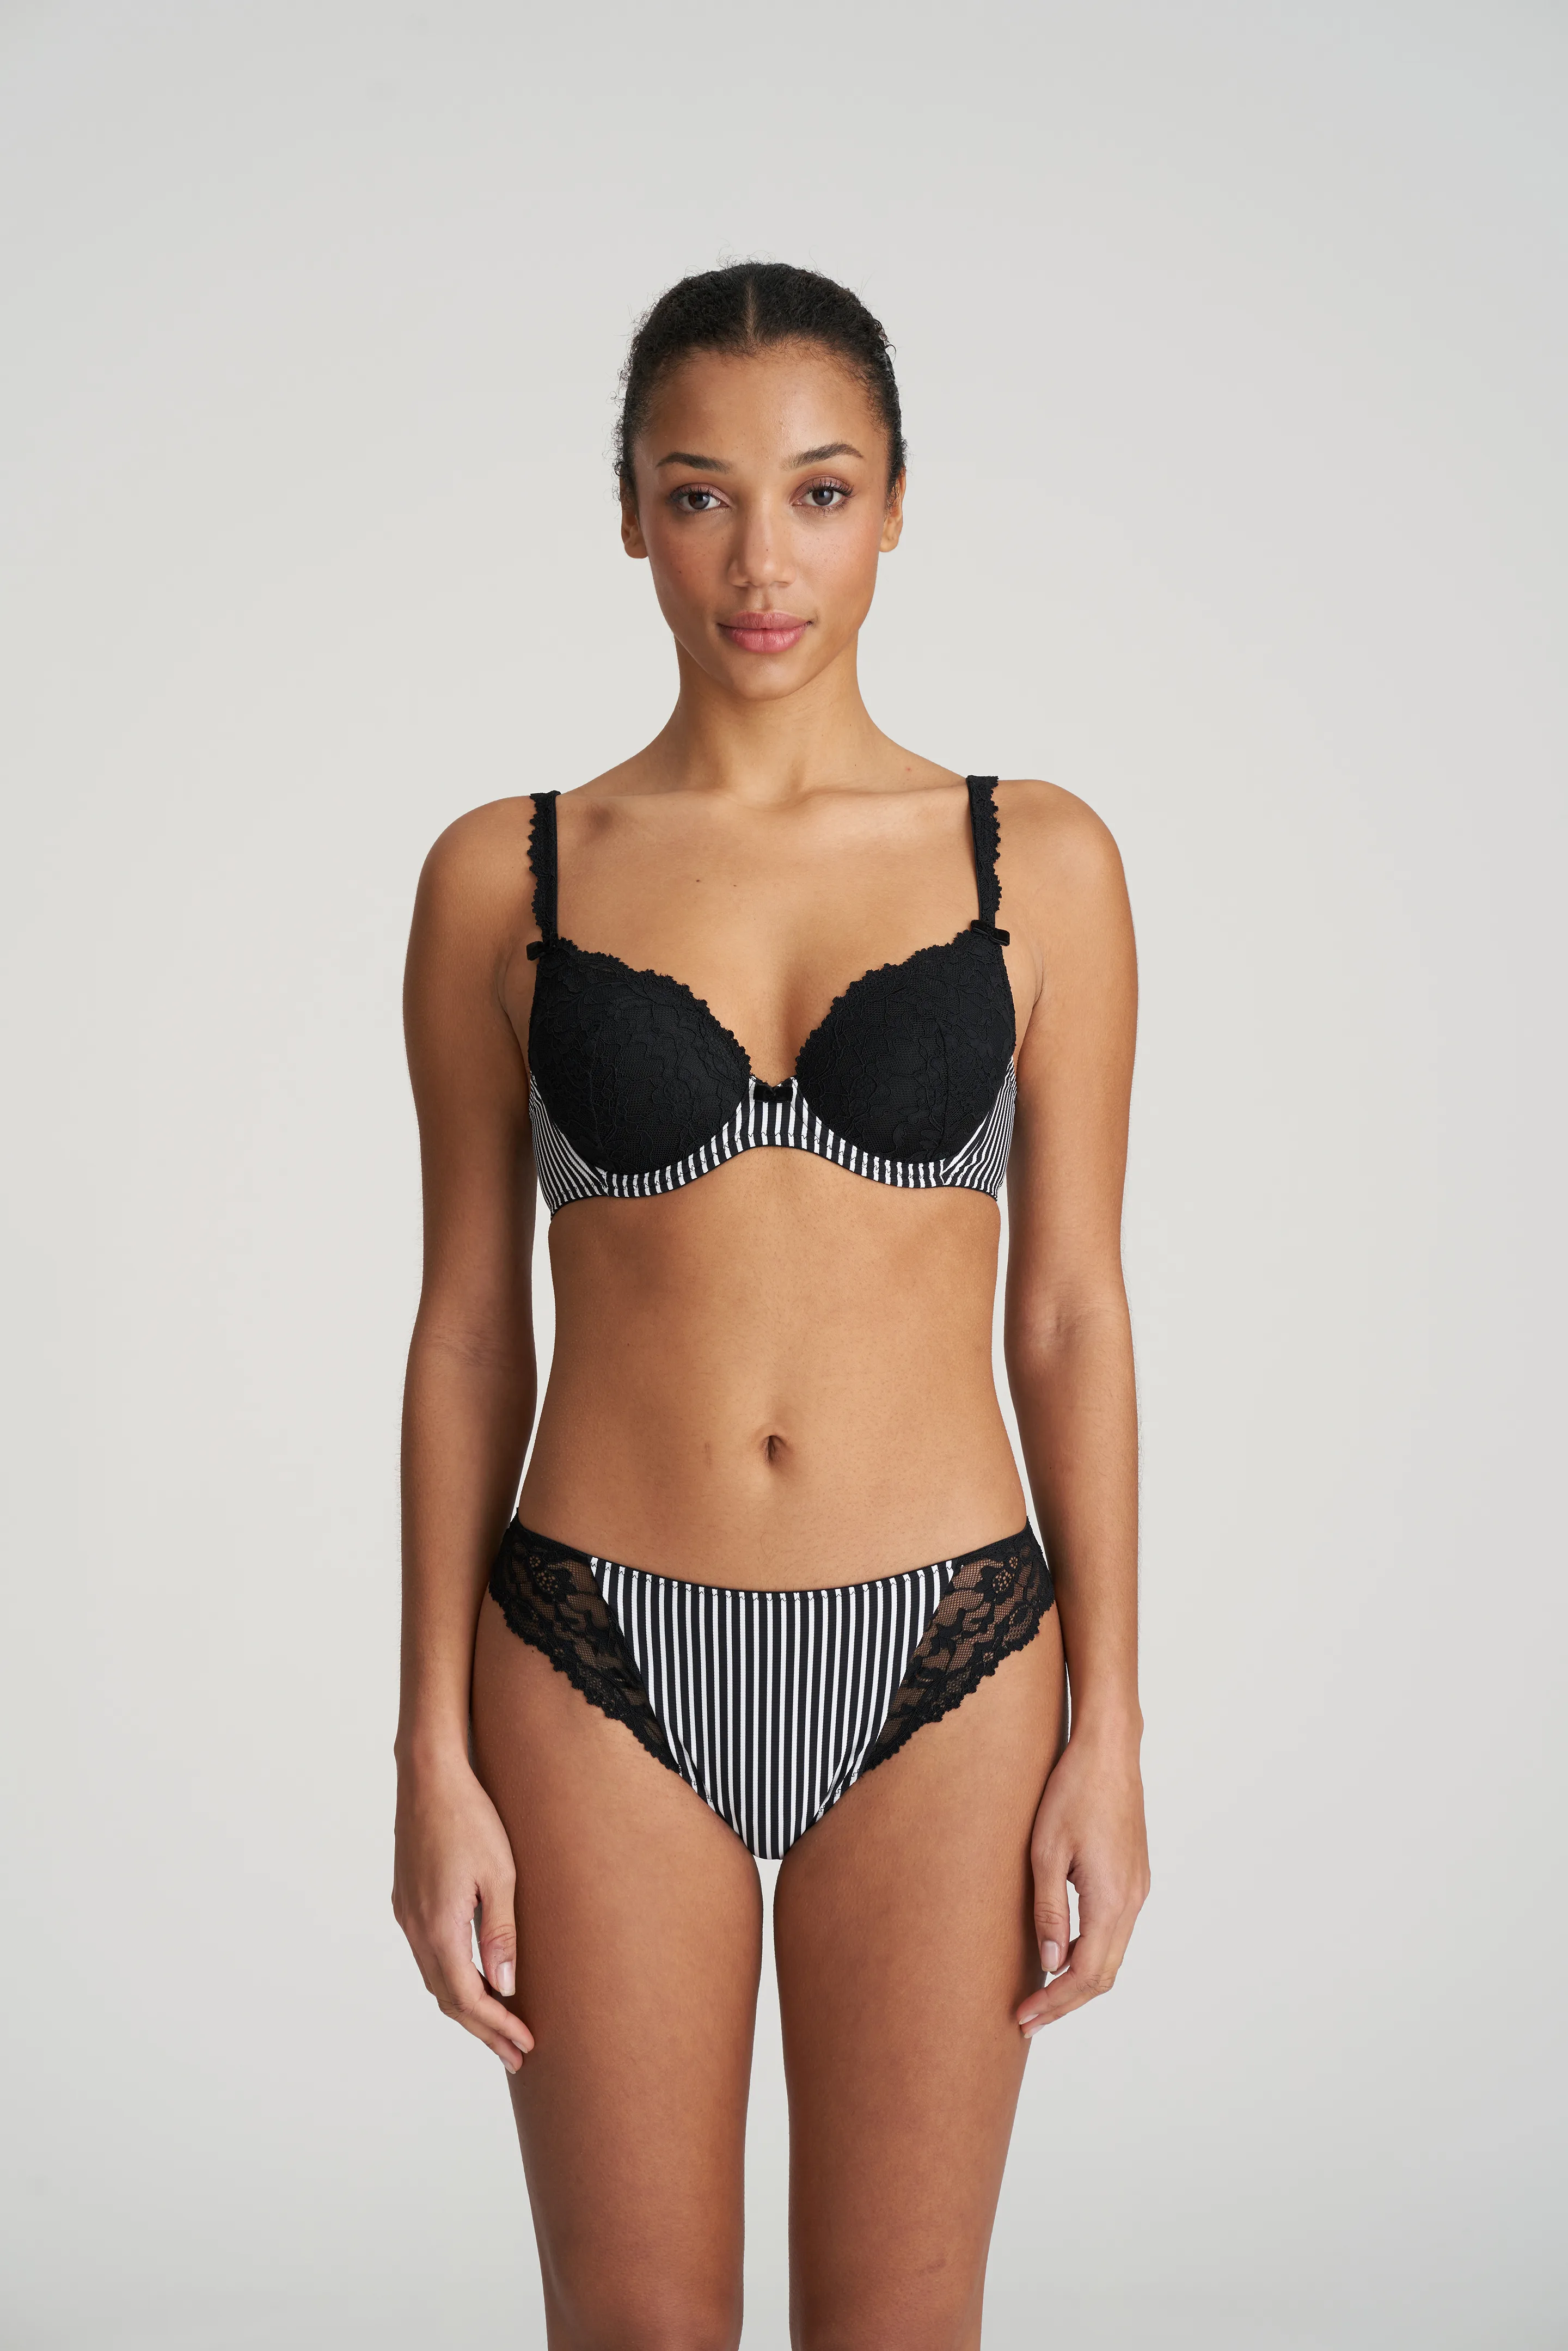 Collection Irresistible - Super push-up bra and Brazilian panty